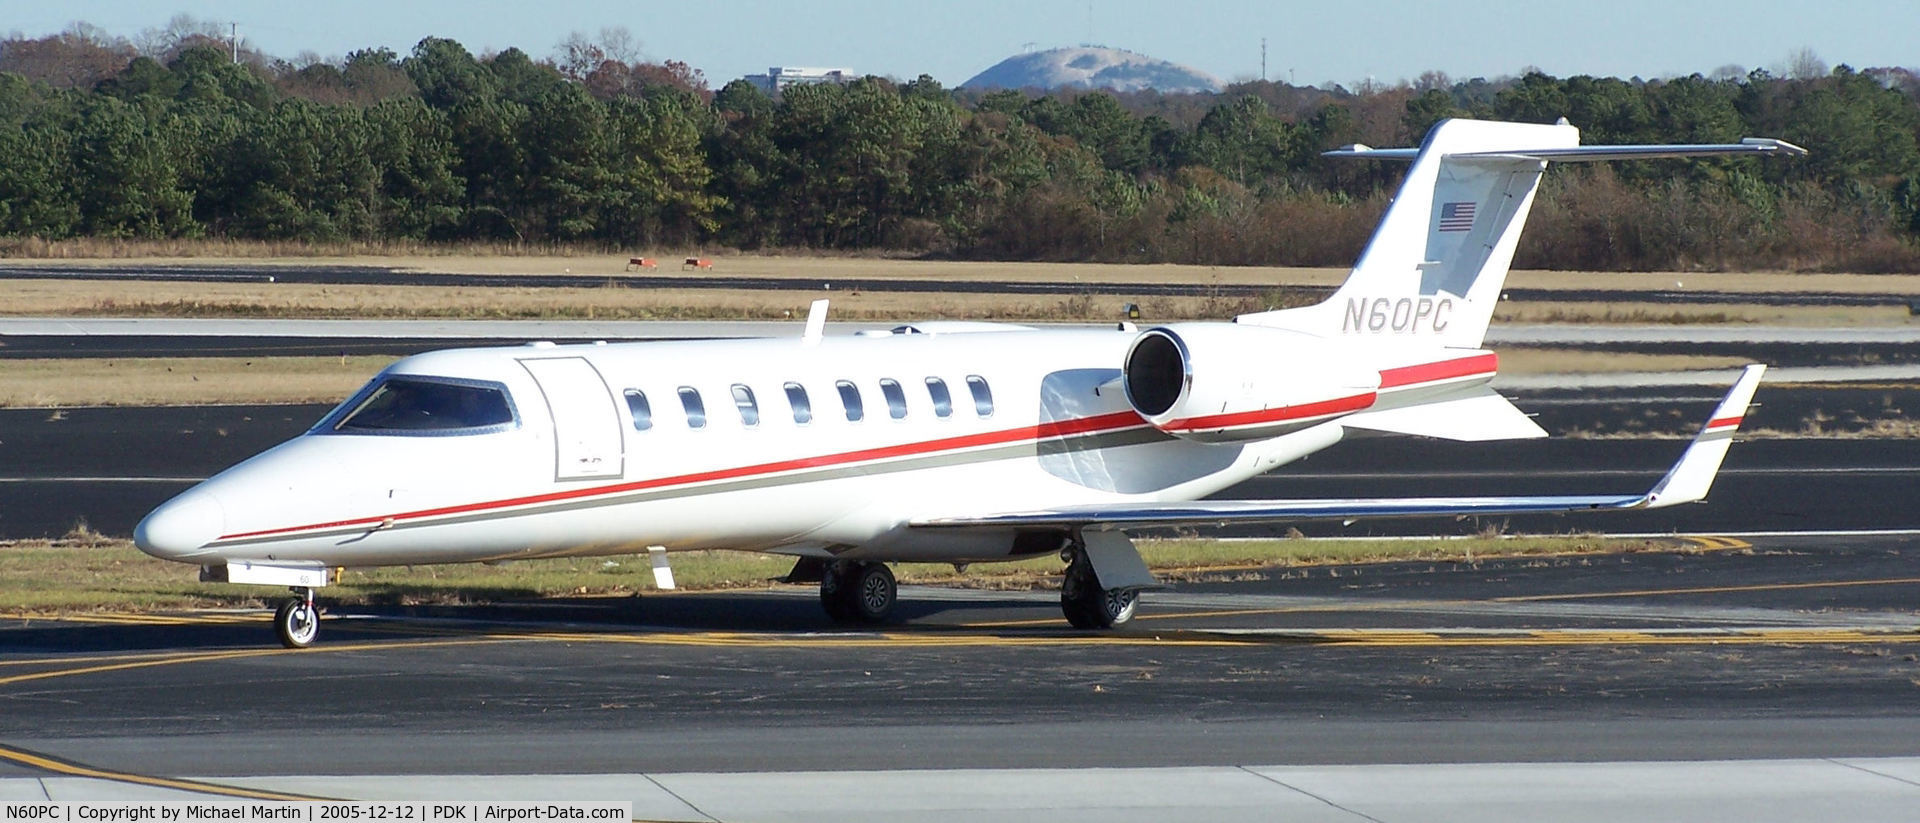 N60PC, 2008 Learjet 45 C/N 351, Southern Companies returning home to PDK